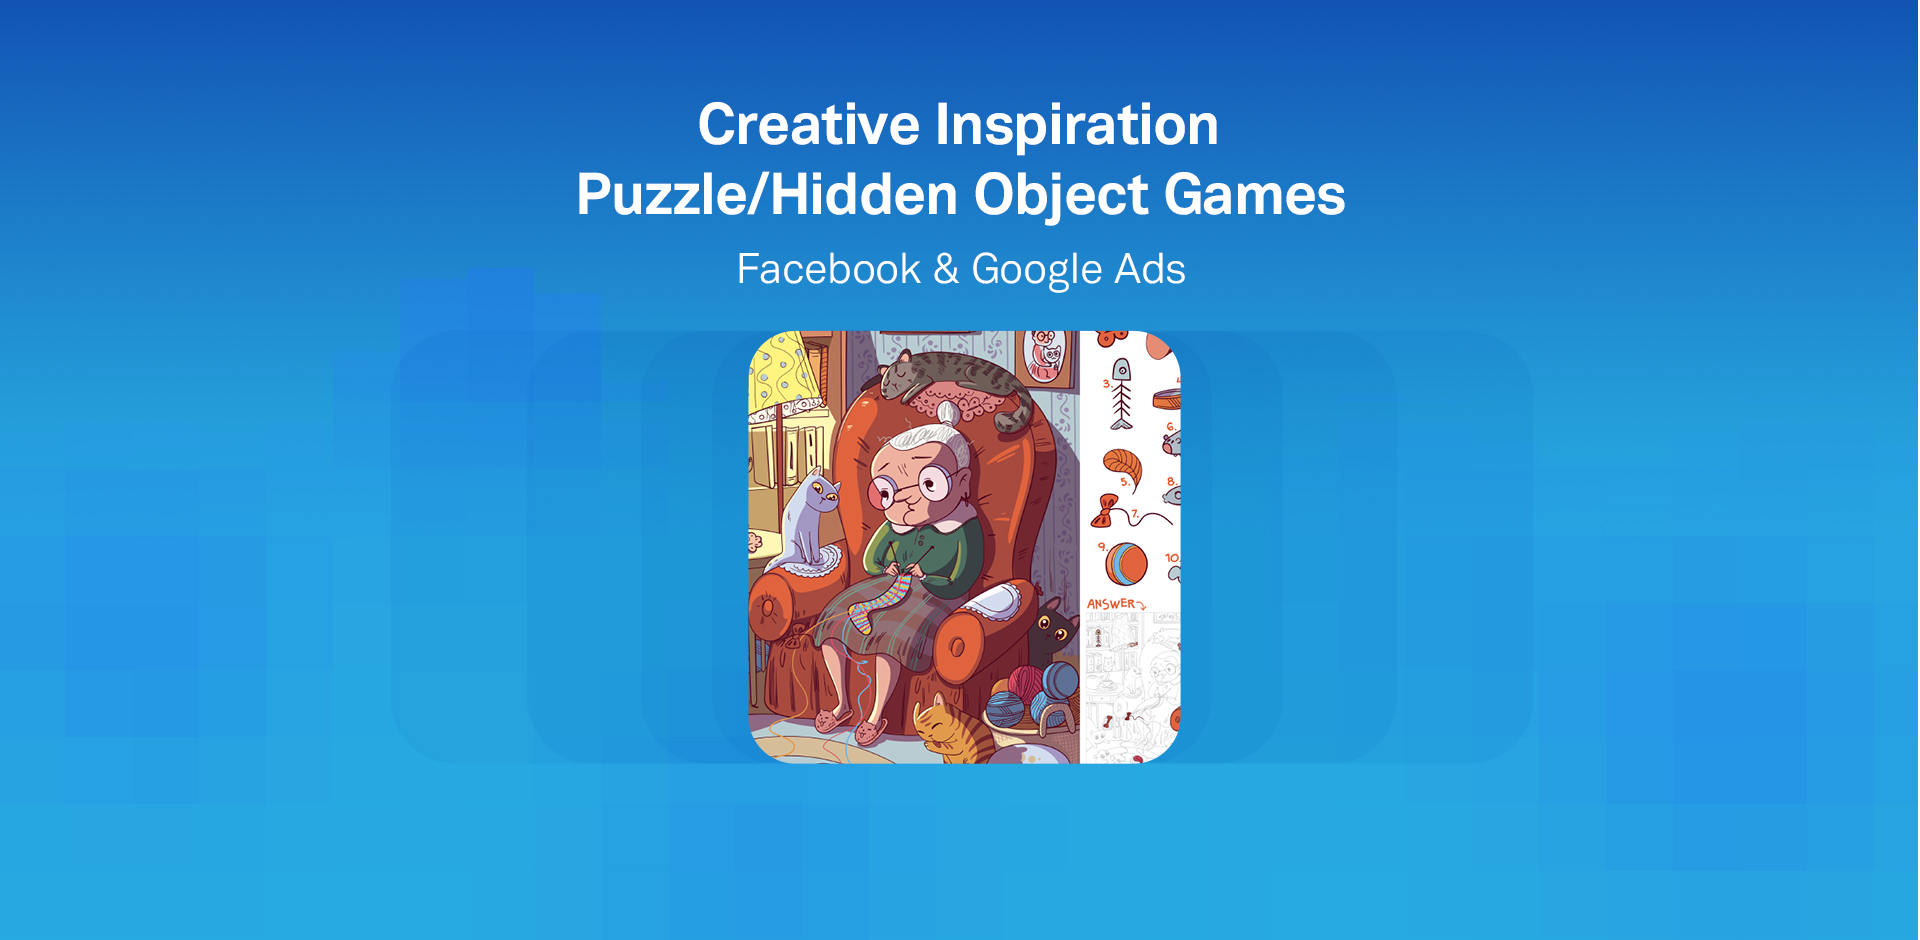 Puzzle / Hidden Object Games Creative Strategy